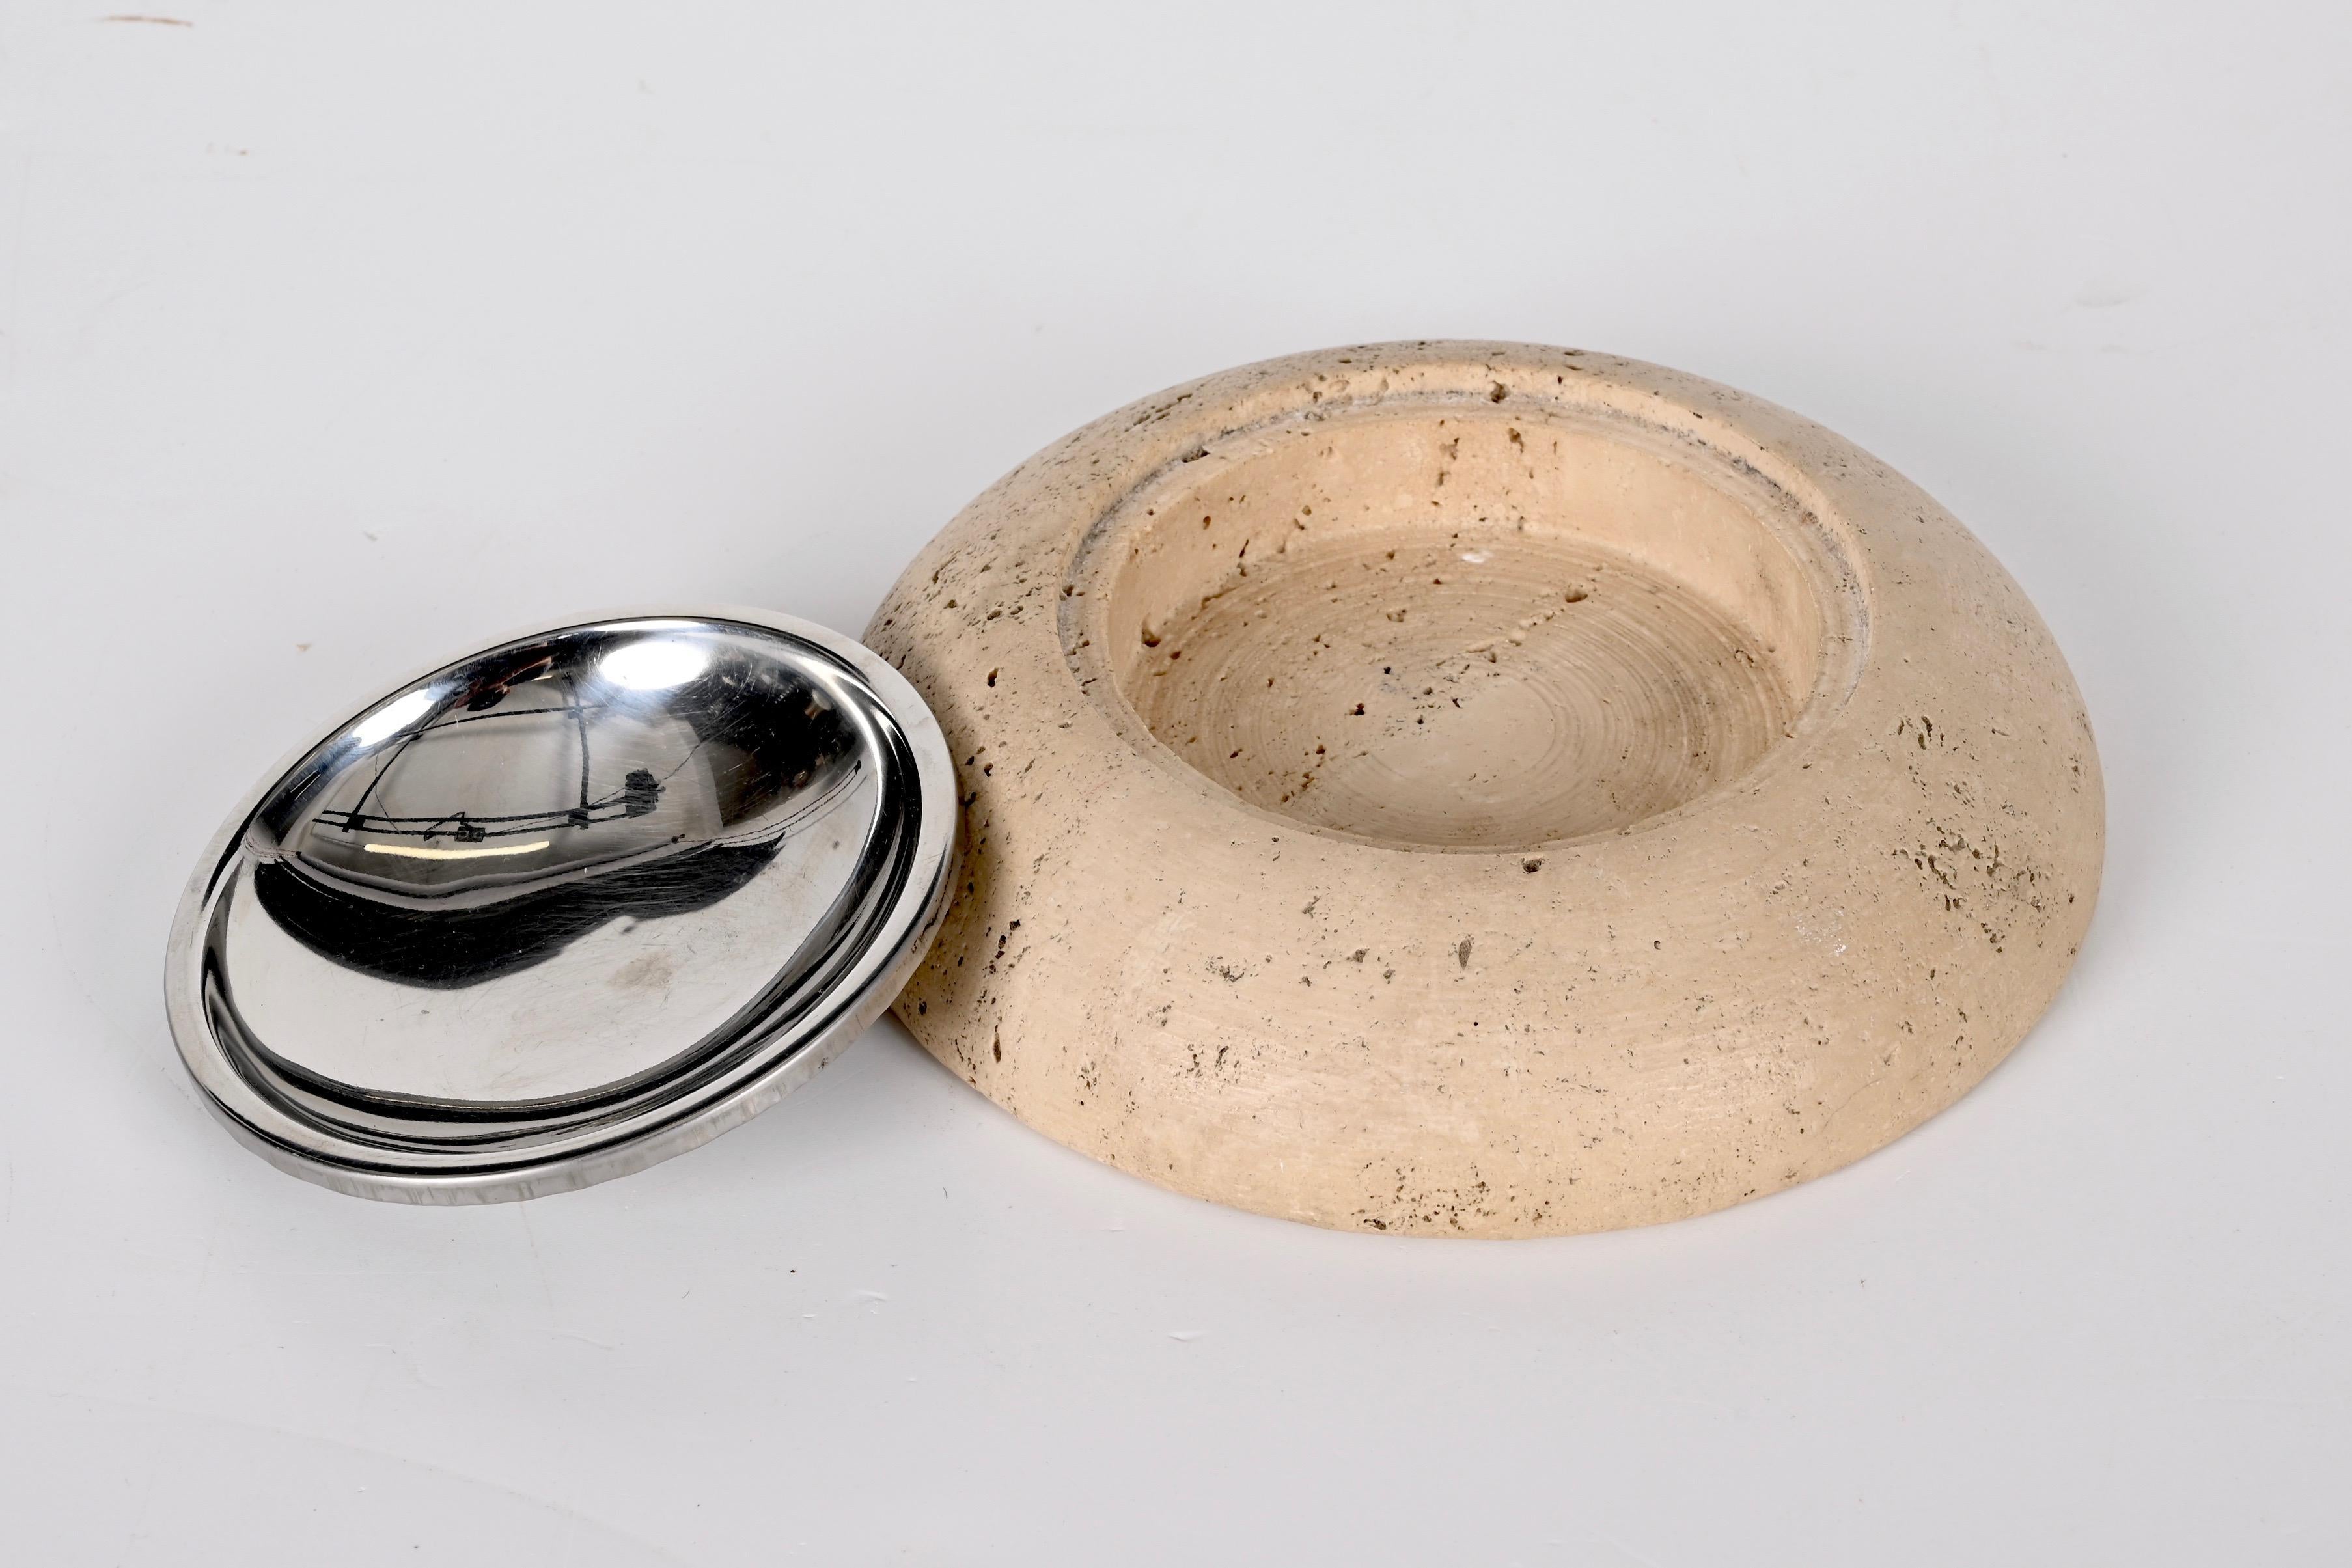 Midcentury Round Ashtray White Travertine Marble and Steel, Mannelli Italy 1970s For Sale 1